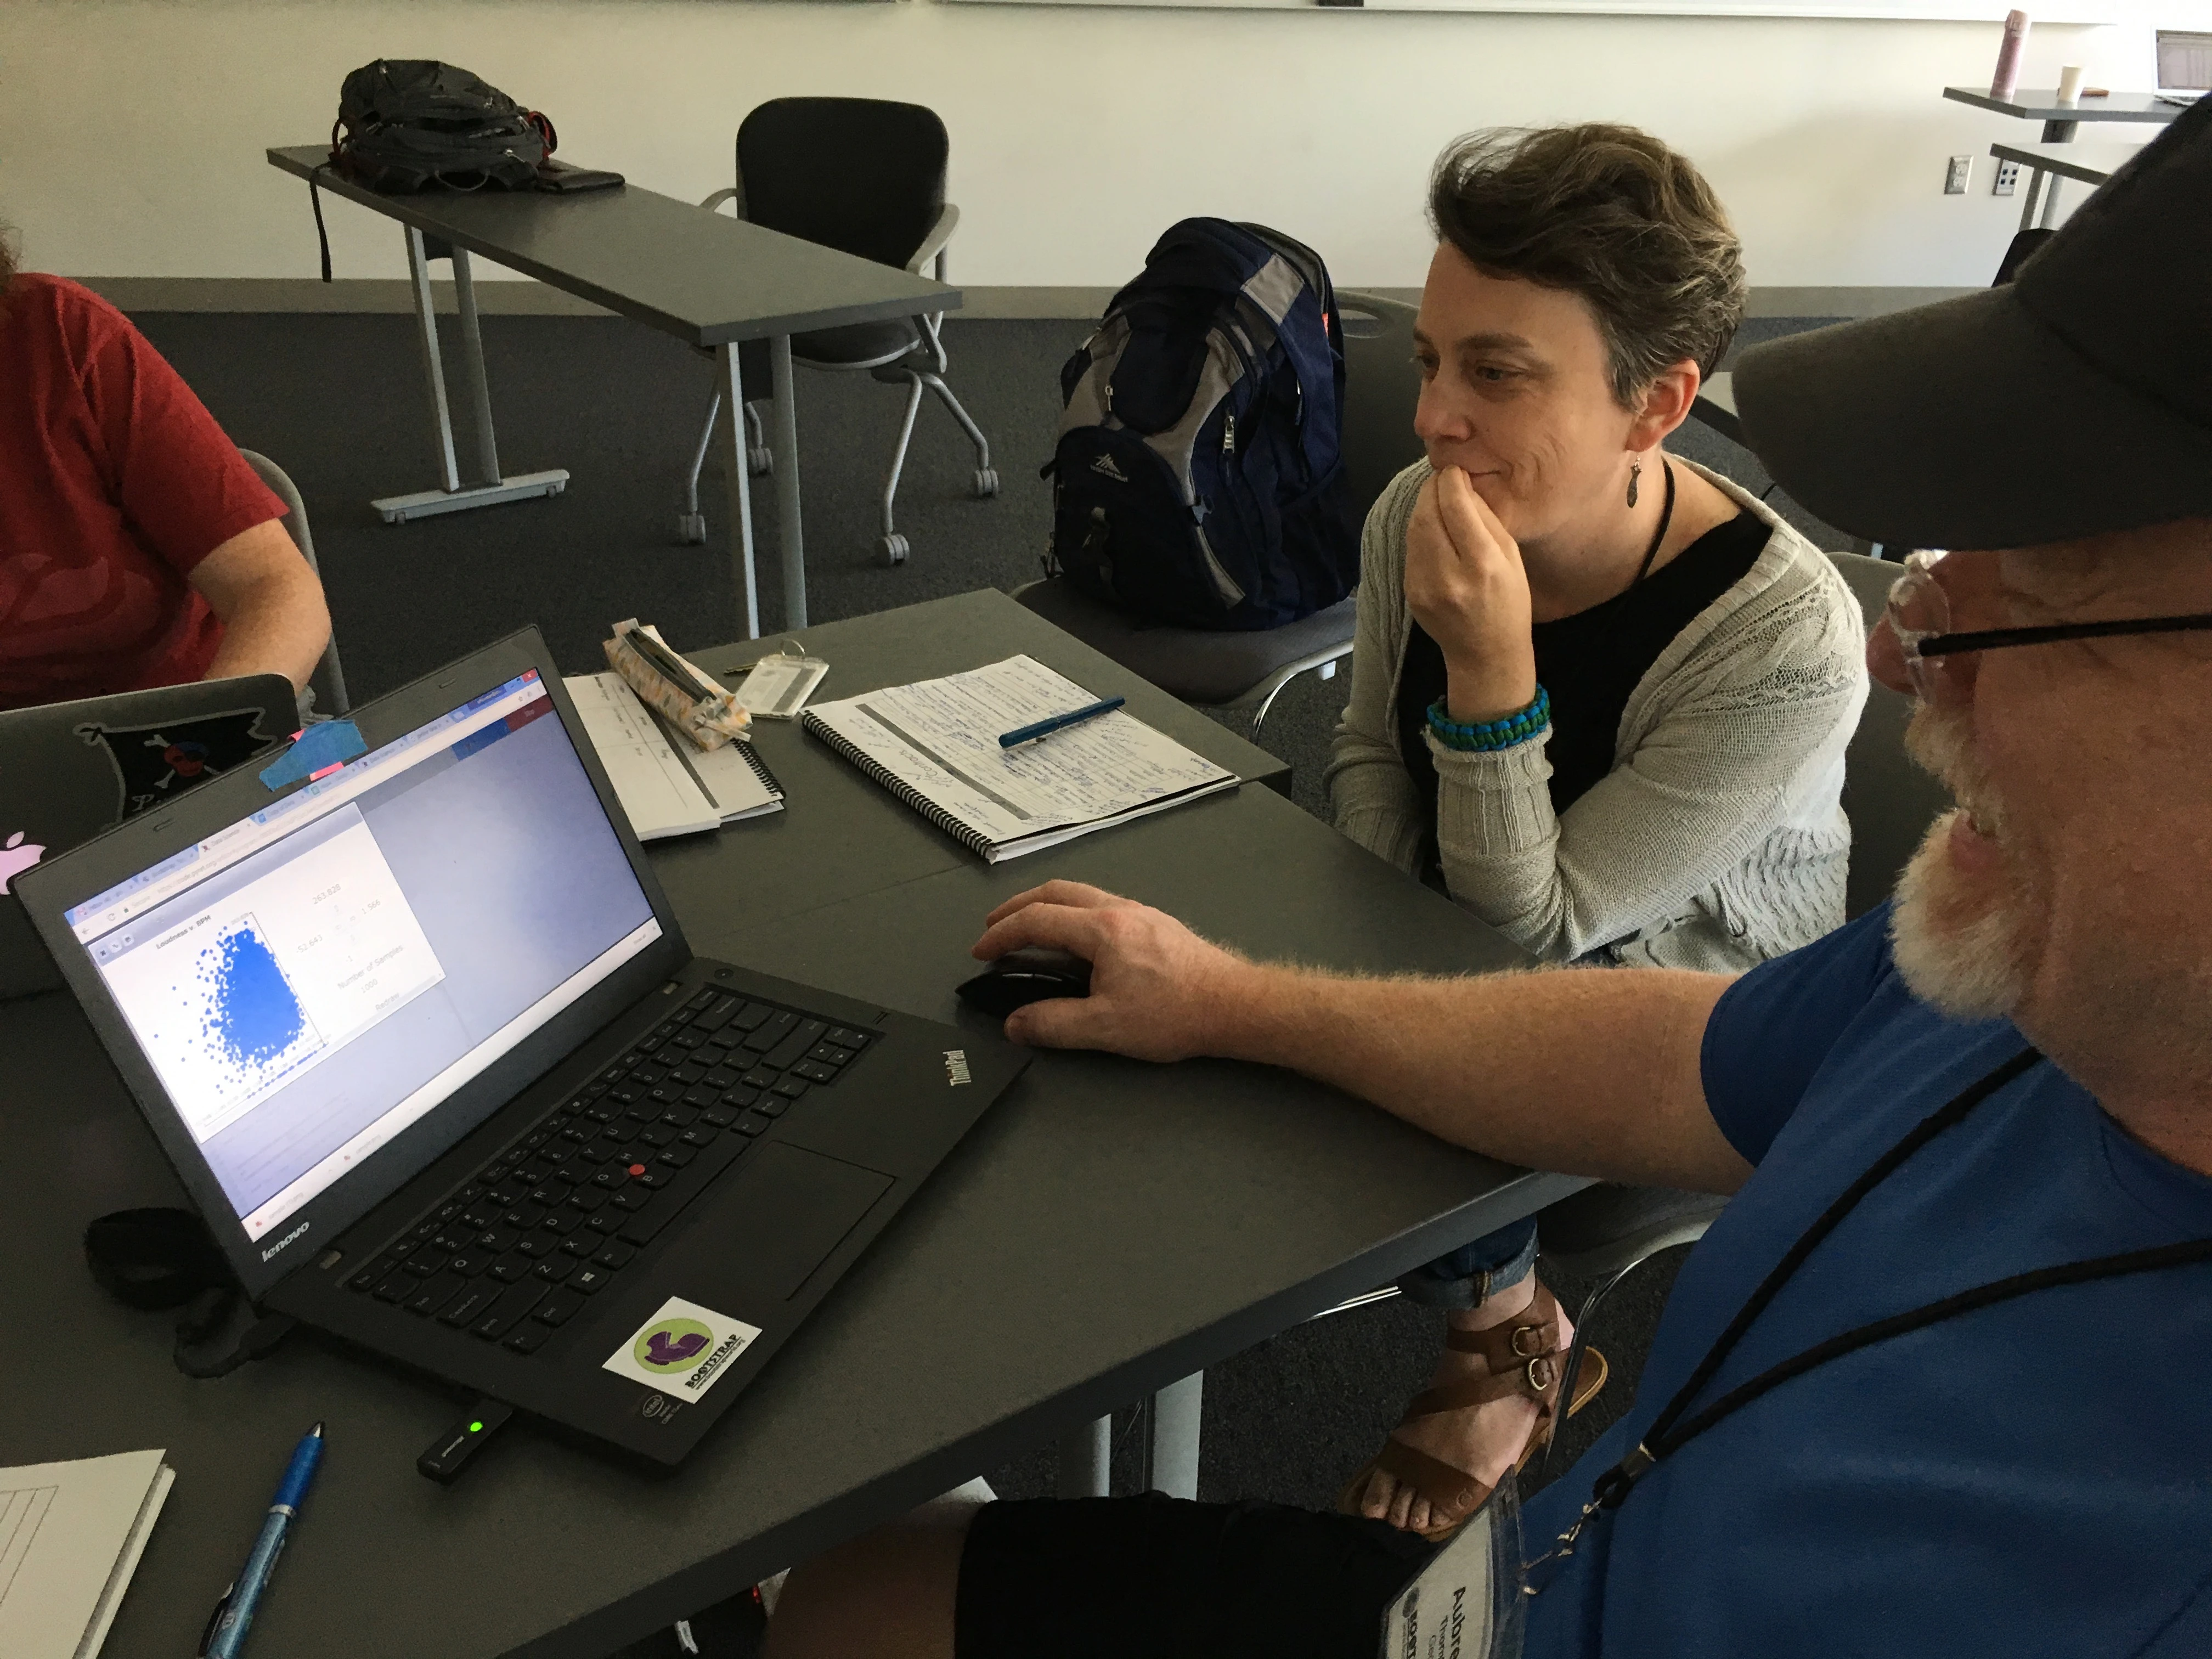 A mentor and students sit around a laptop and discuss data science.